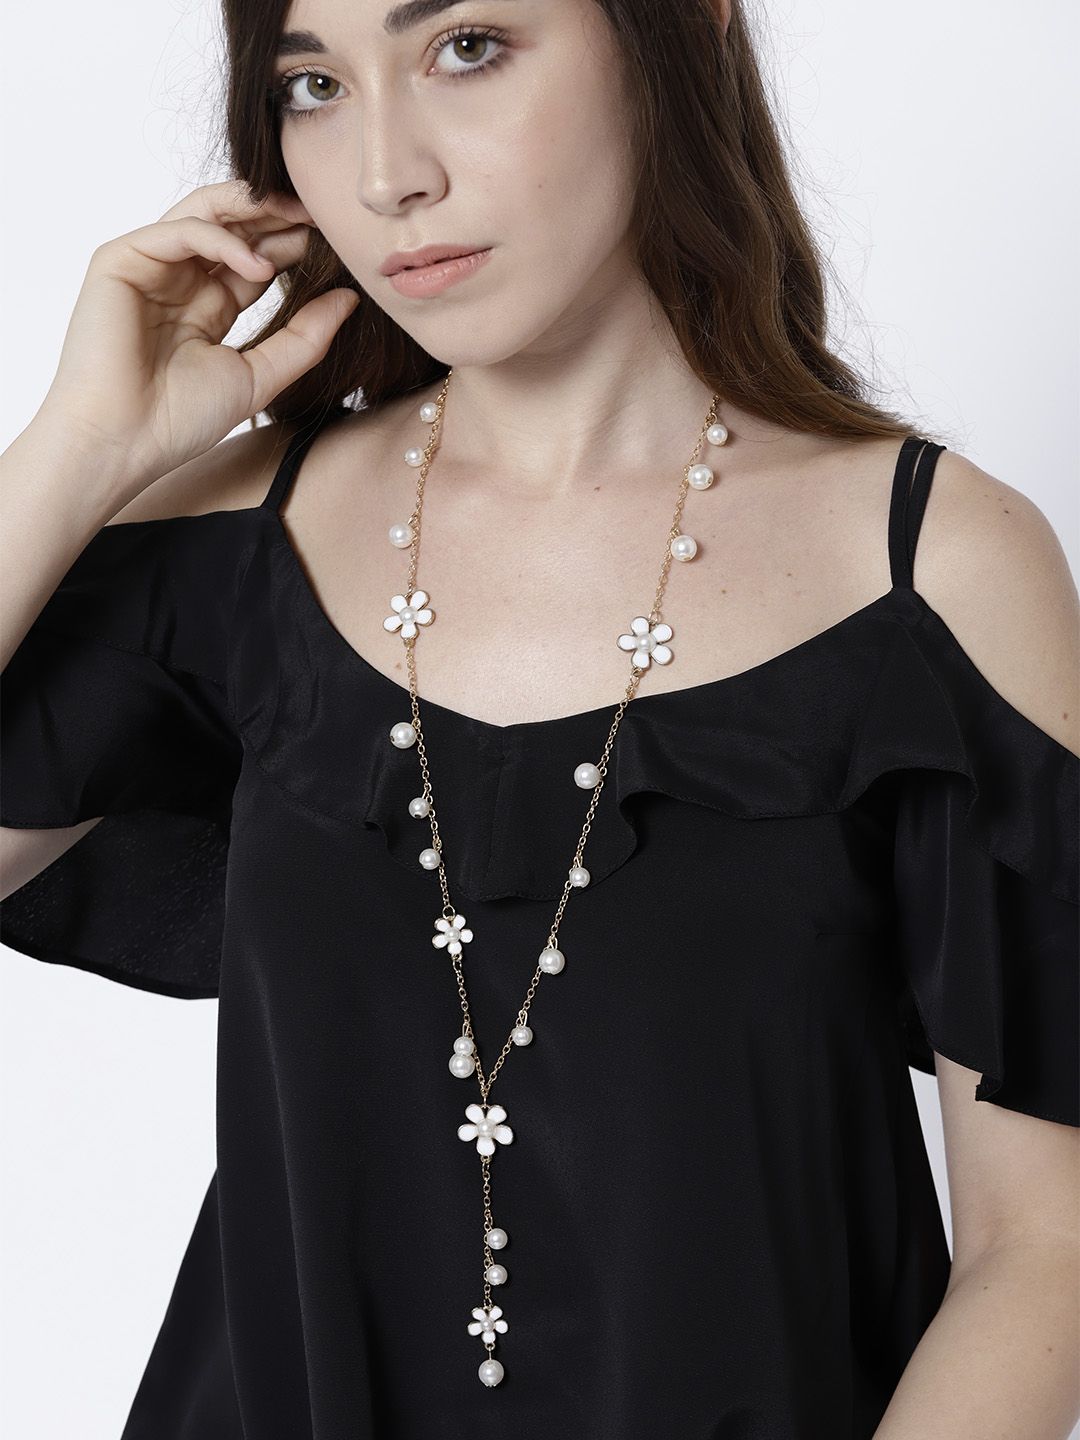 YouBella White Gold-Plated Beaded & Enamelled Lariat Necklace Price in India